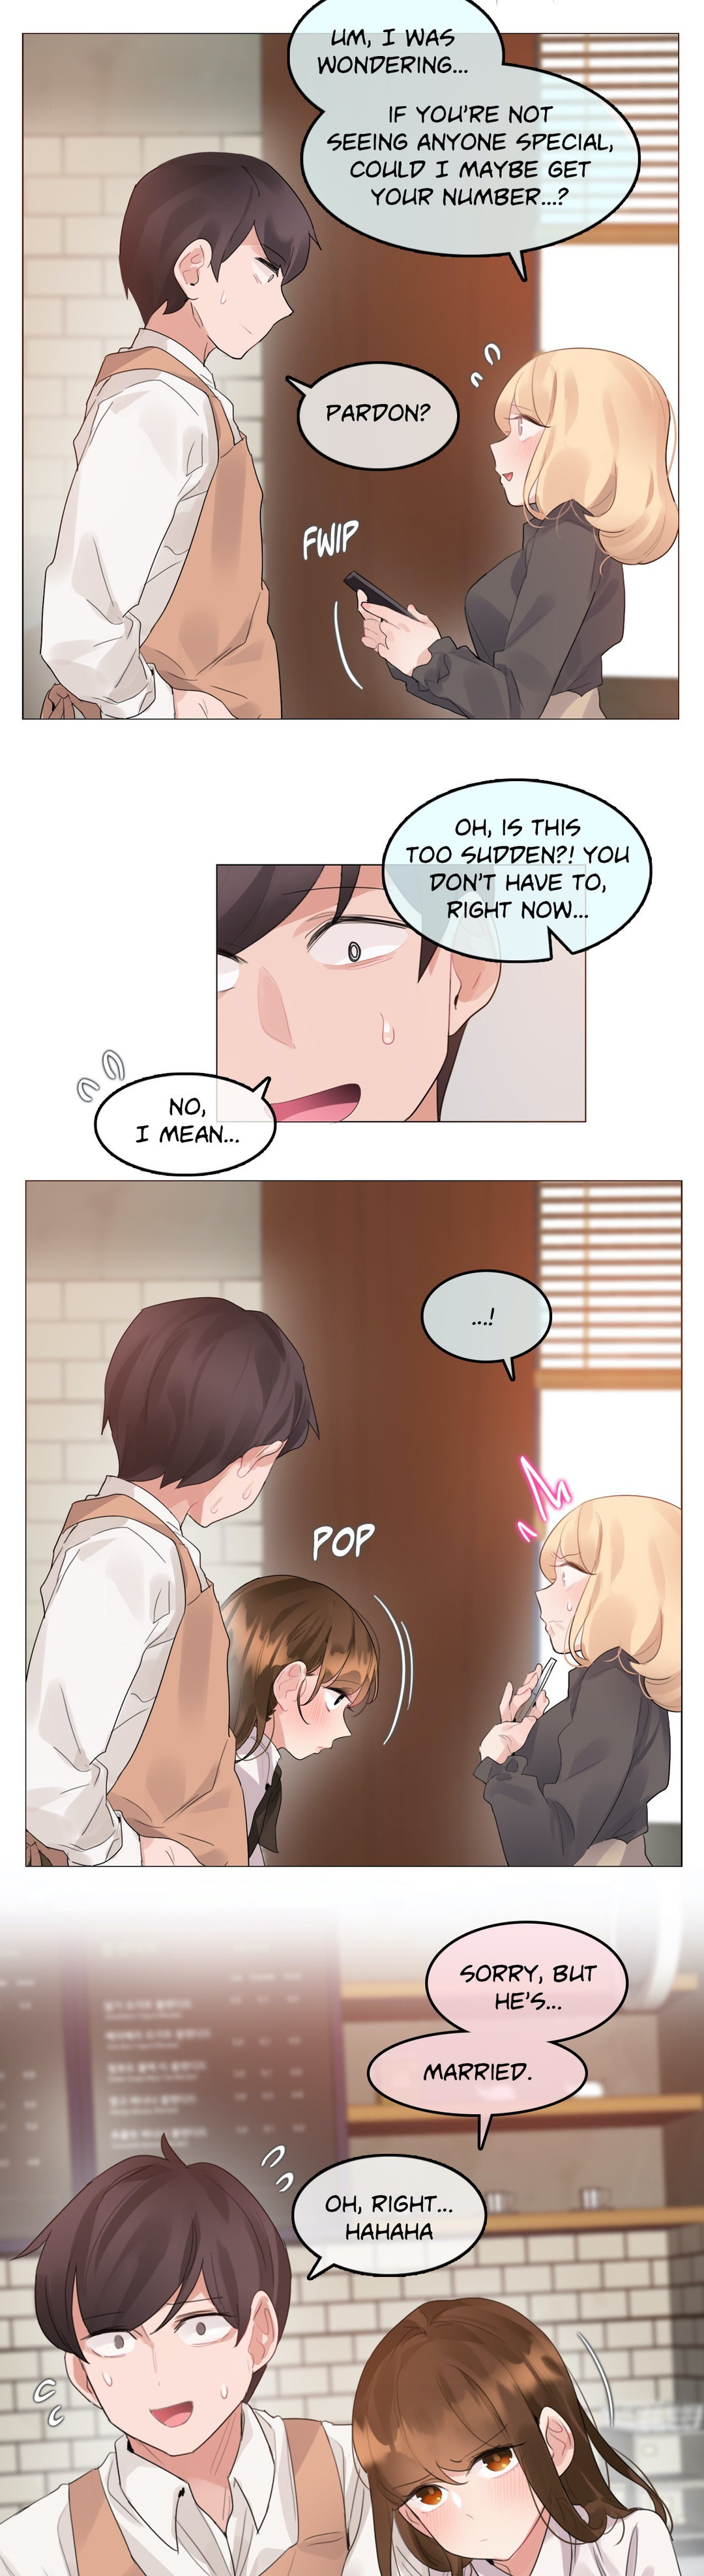 A Pervert’s Daily Life - Chapter 117 Page 8